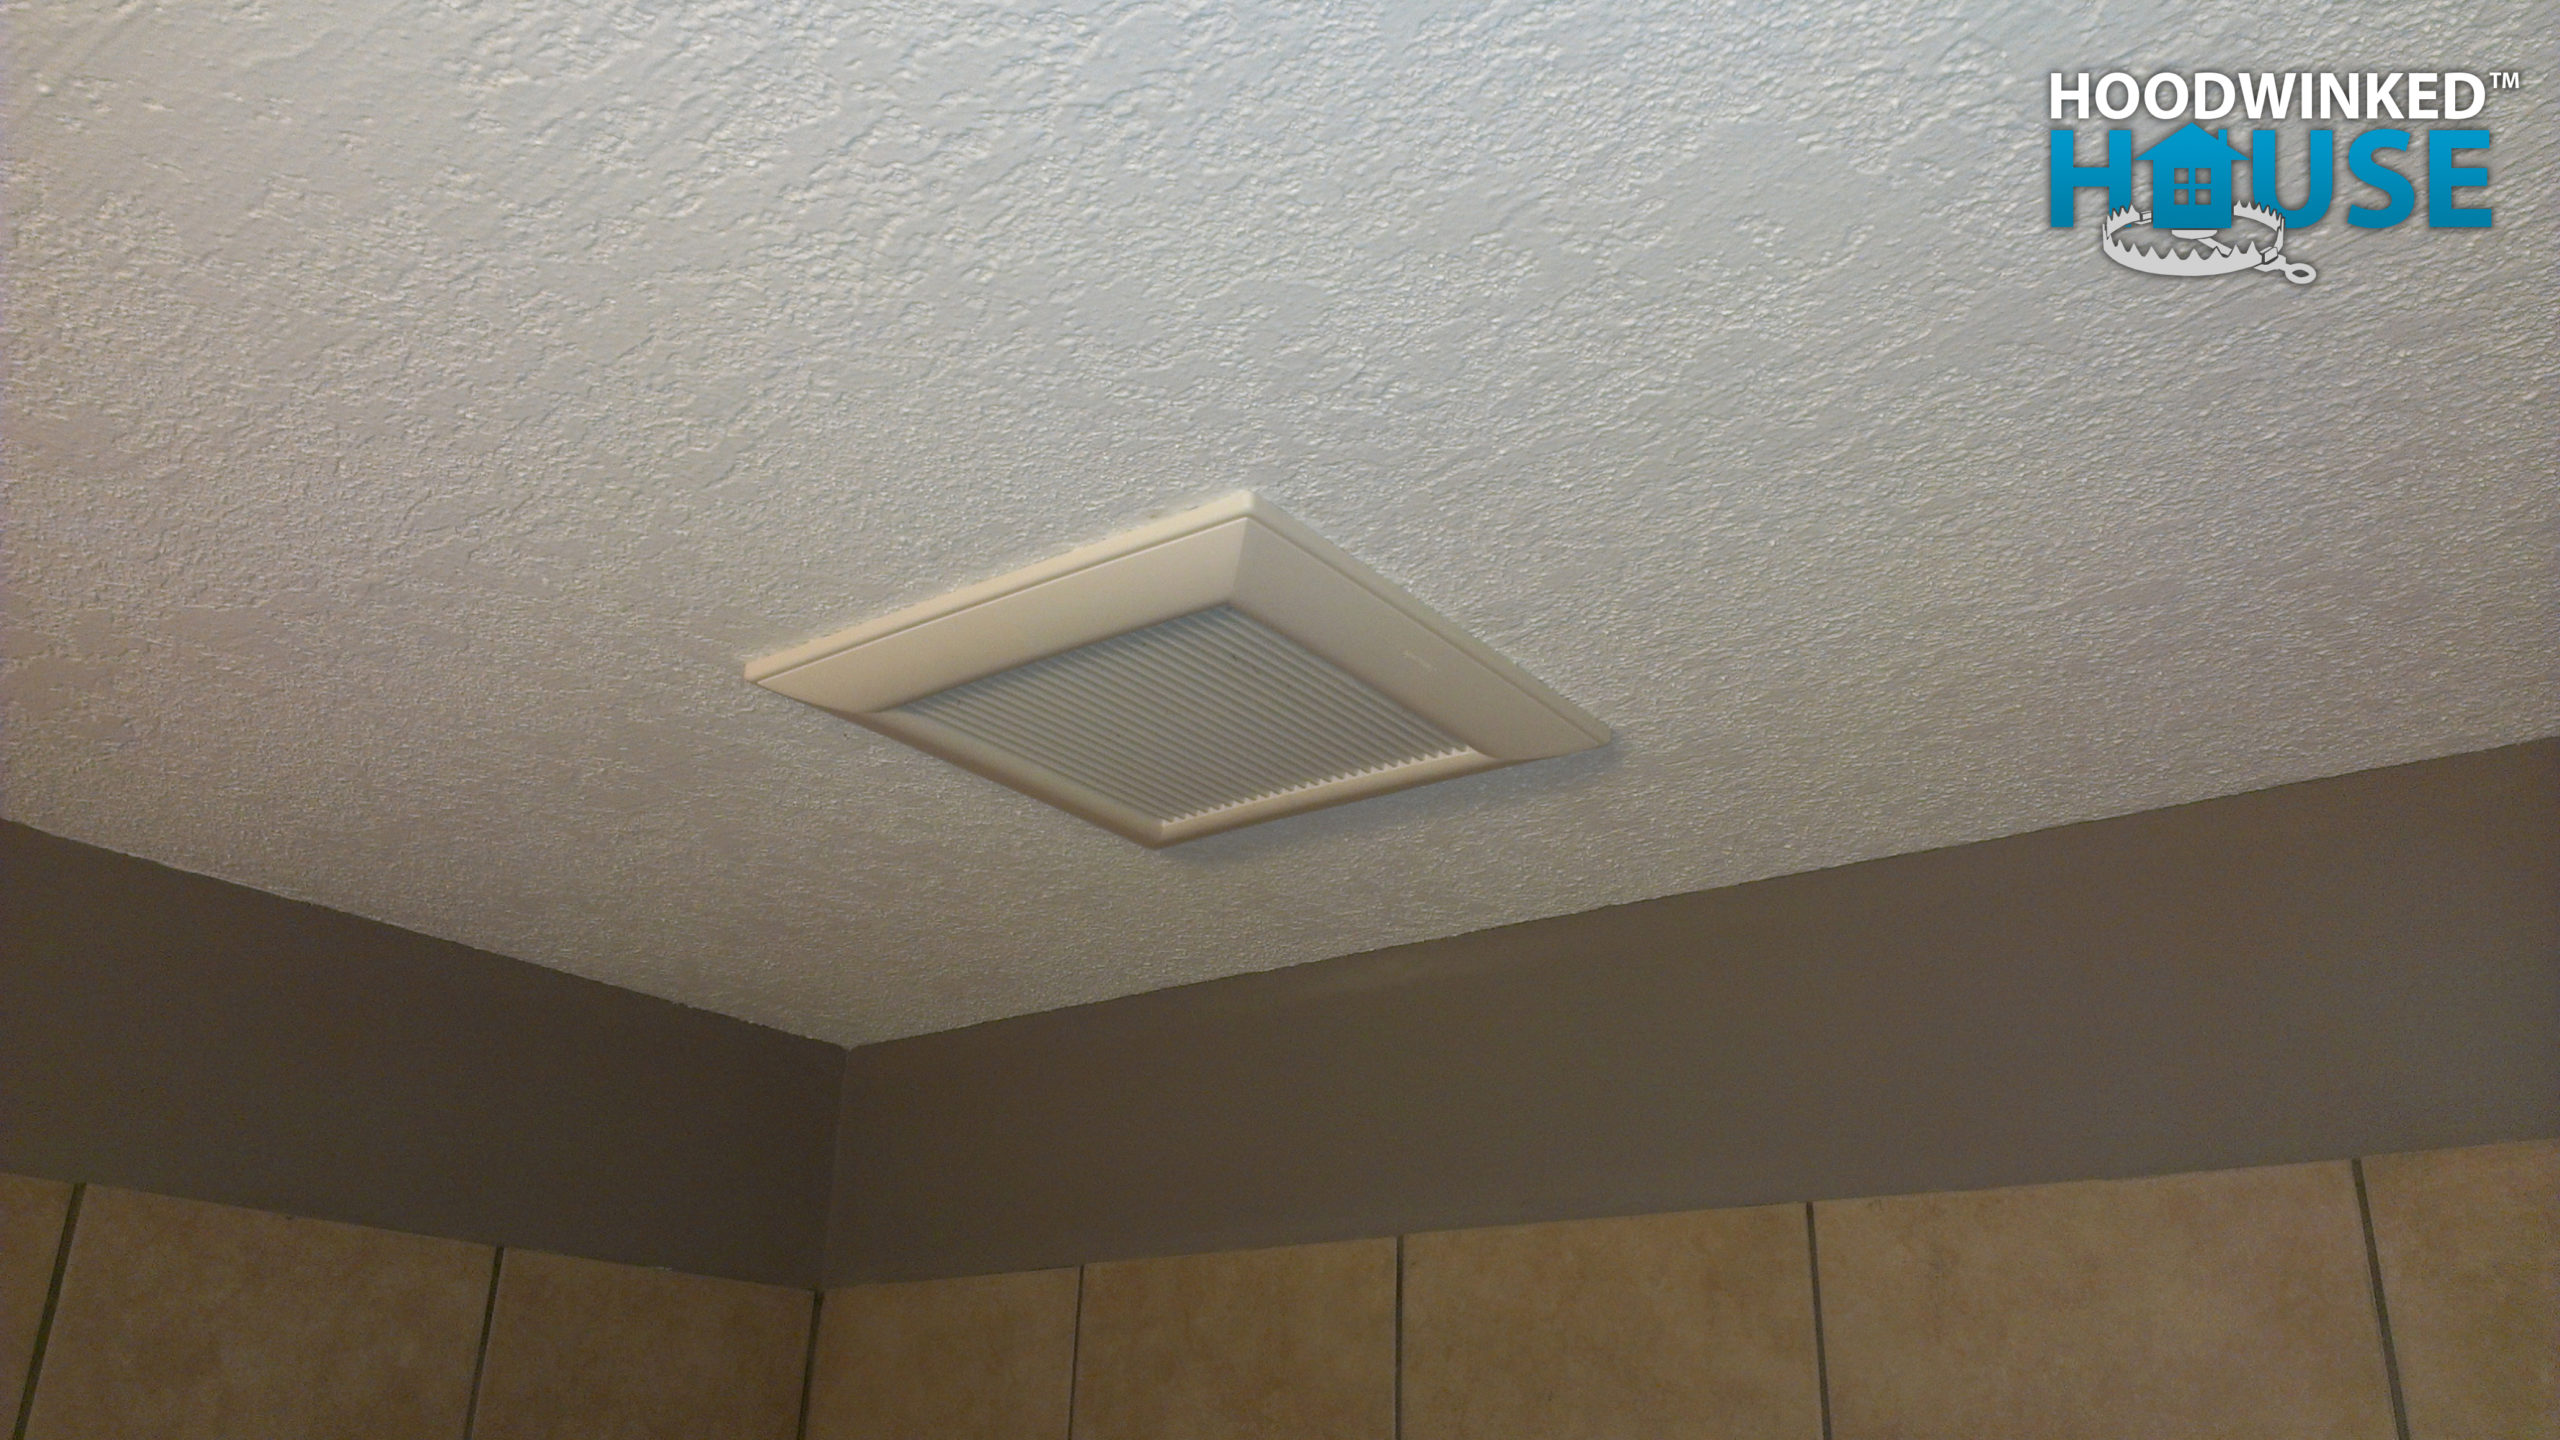 New bathroom fan correctly ducted through the roof.